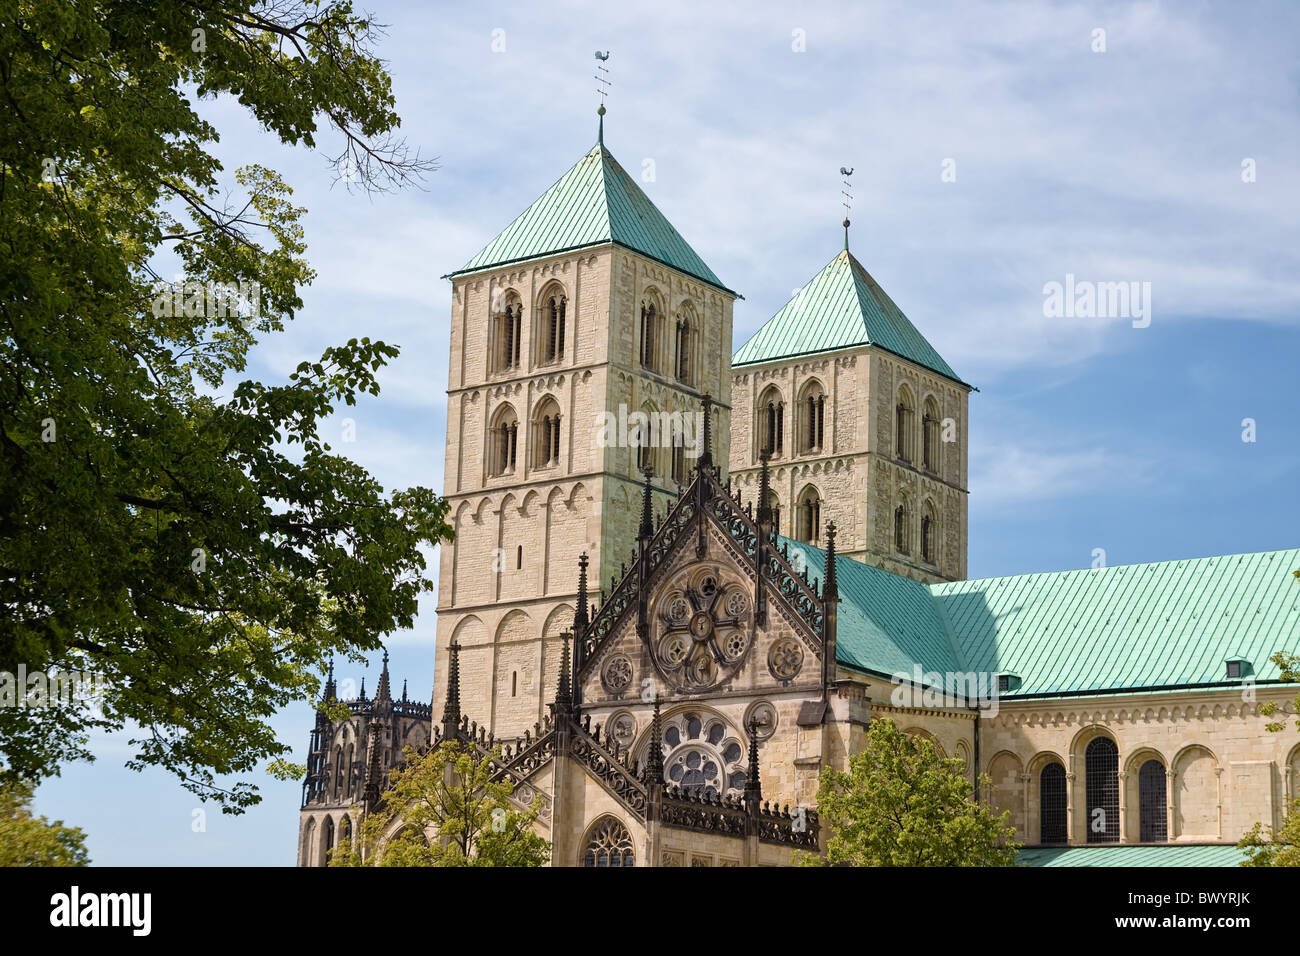 the famous cathedral st. paulus in Münster, Germany. Stock Photo